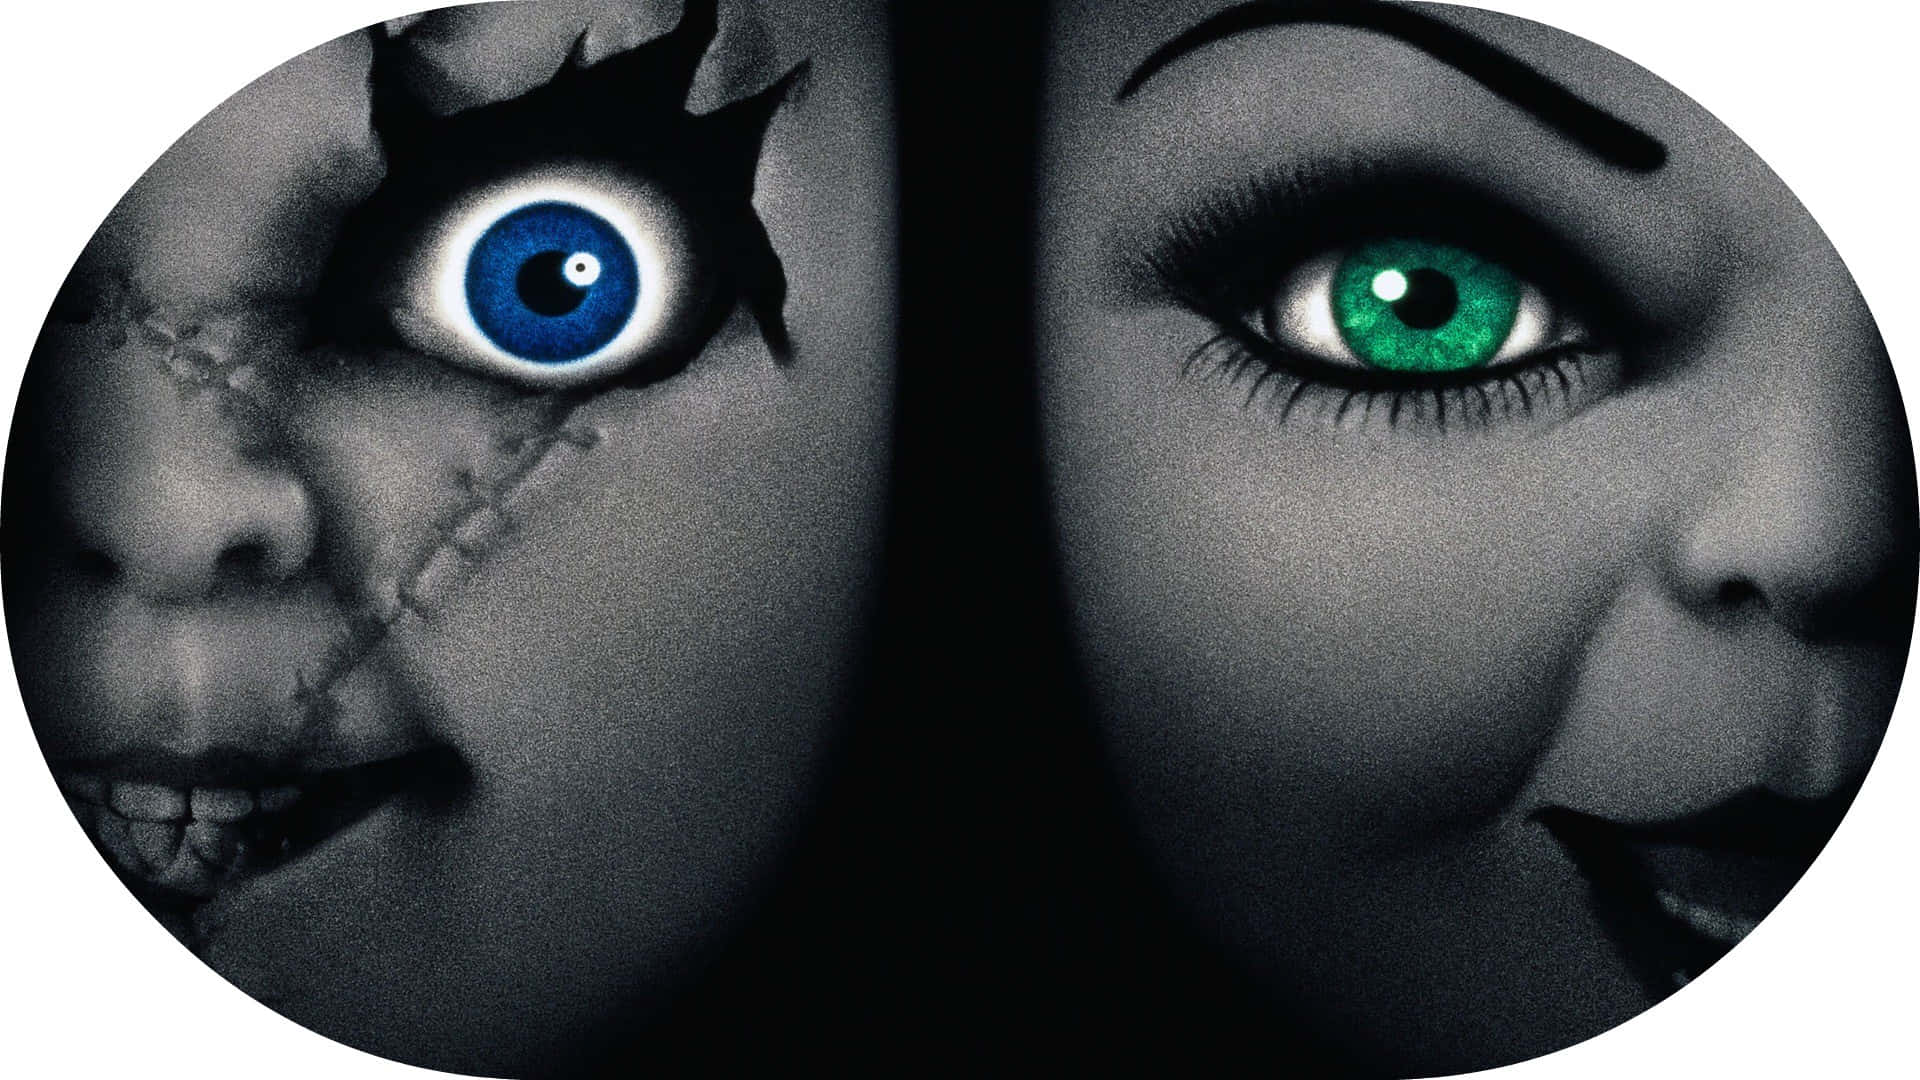 Scary movie couple Chucky and Tiffany giving each other a cheeky smile. Wallpaper